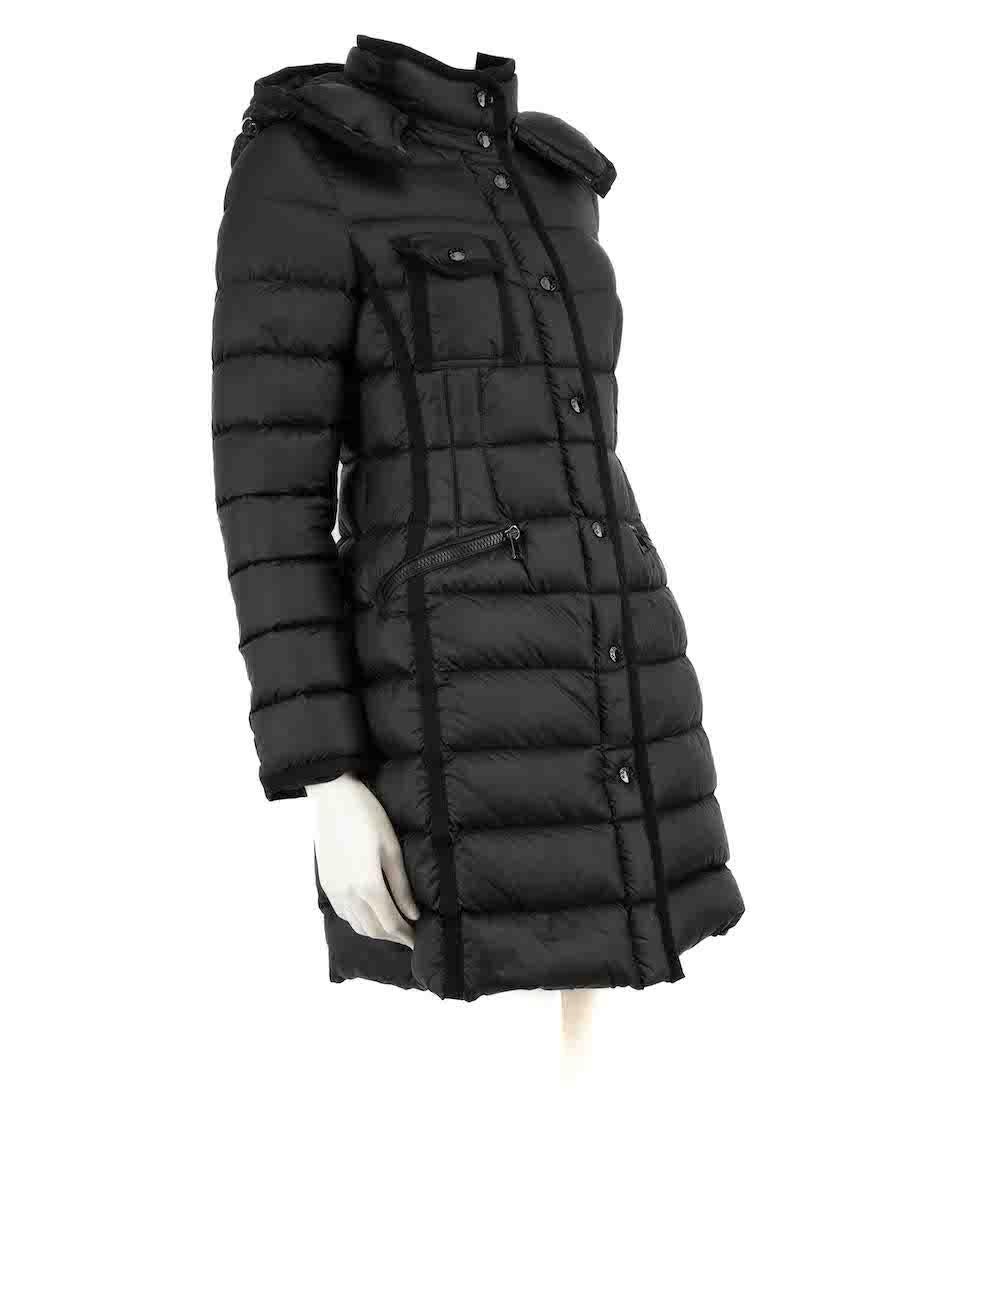 CONDITION is Very good. Minimal wear to coat is evident. Small plucks to the weave at the centre front, some tarnishing to the poppers. There is some fraying to the inside graphic care label on this used Moncler designer resale item.
 
 
 
 Details
